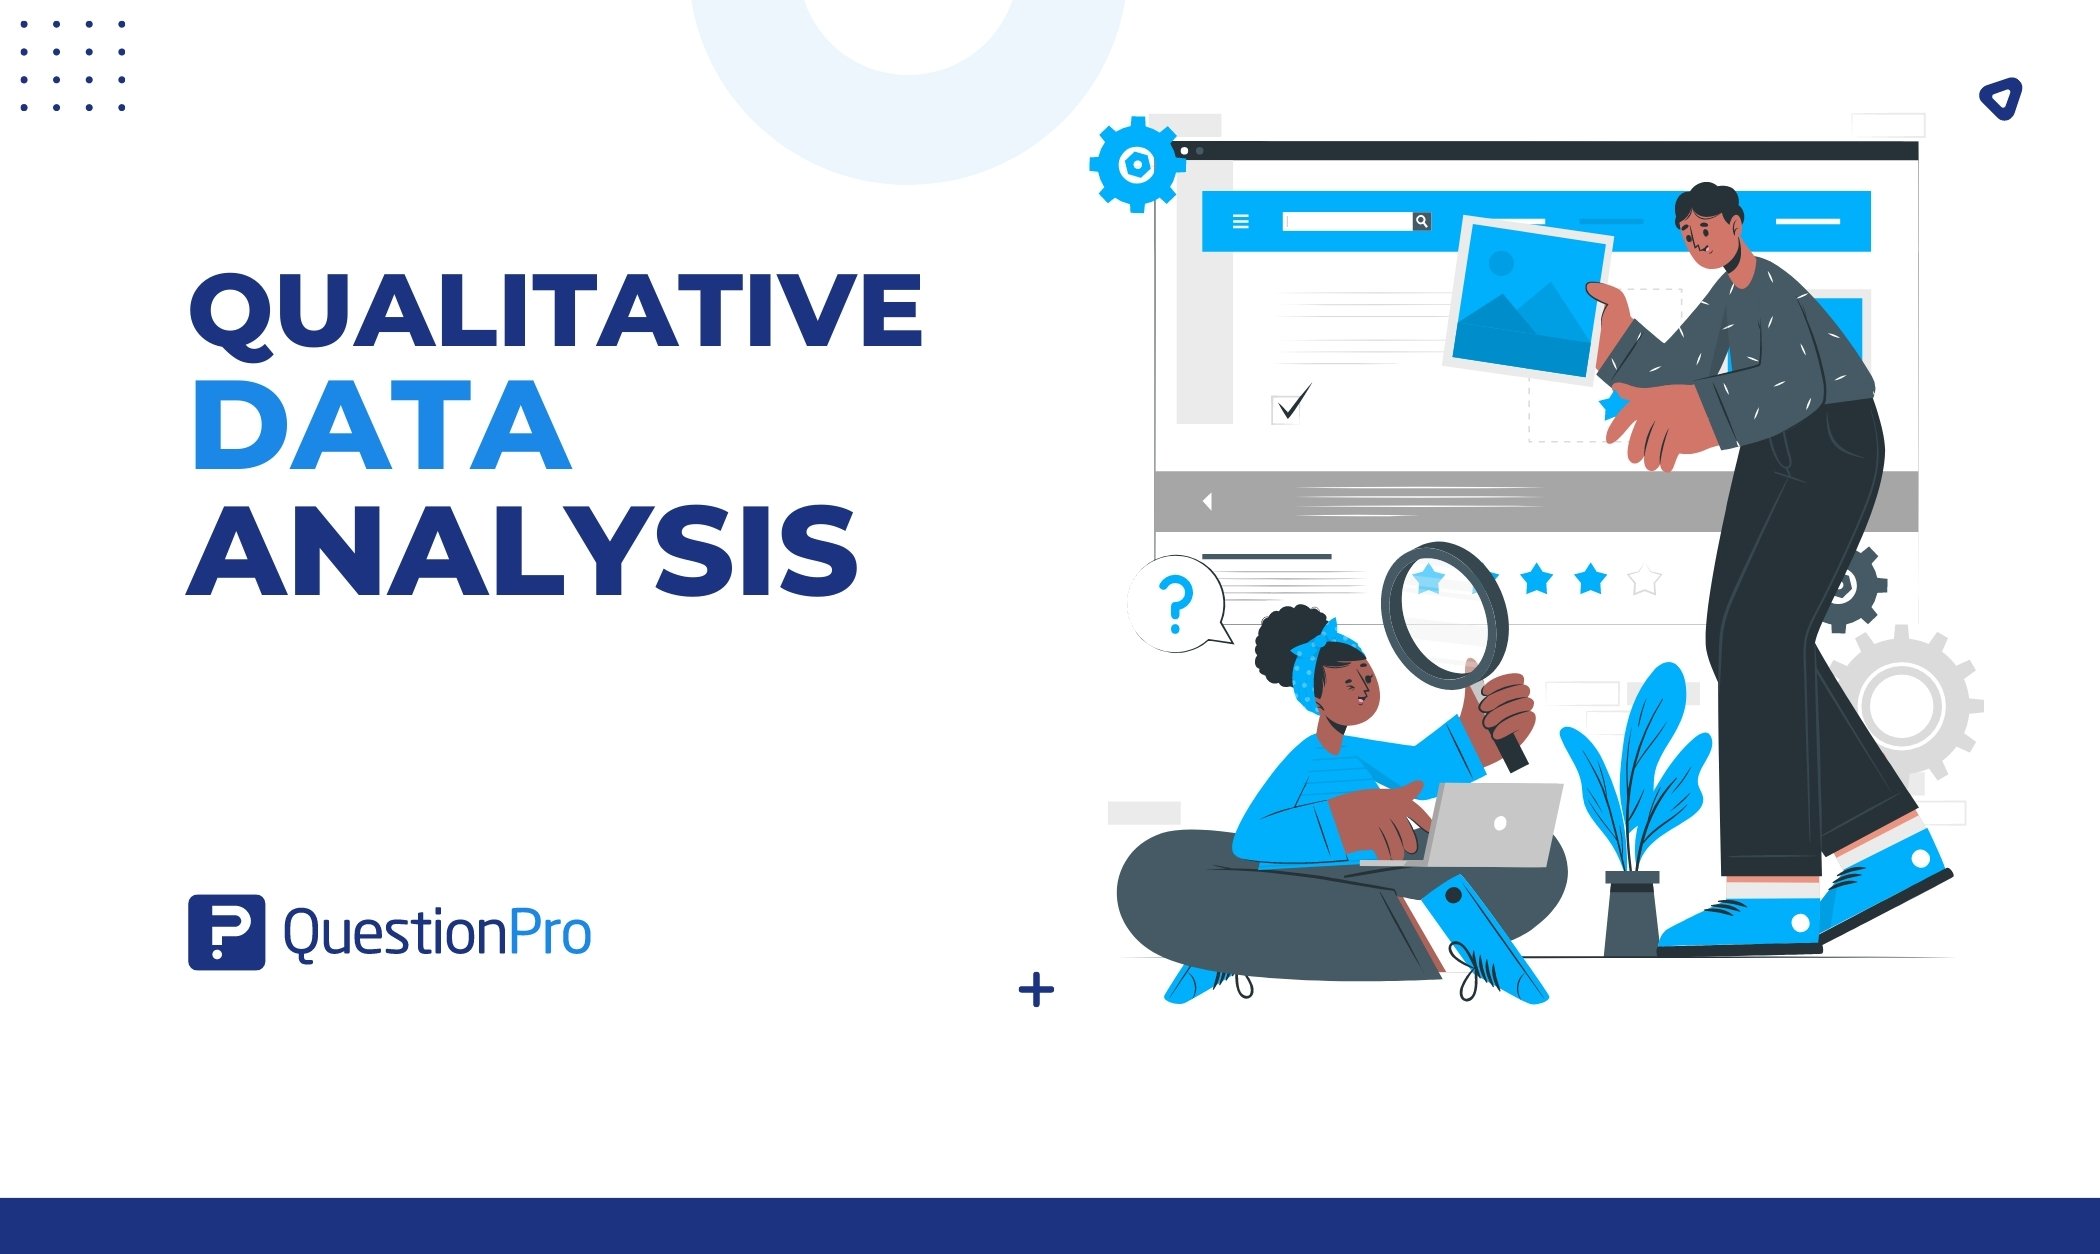 Explore qualitative data analysis with diverse methods and real-world examples. Uncover the nuances of human experiences with this guide.